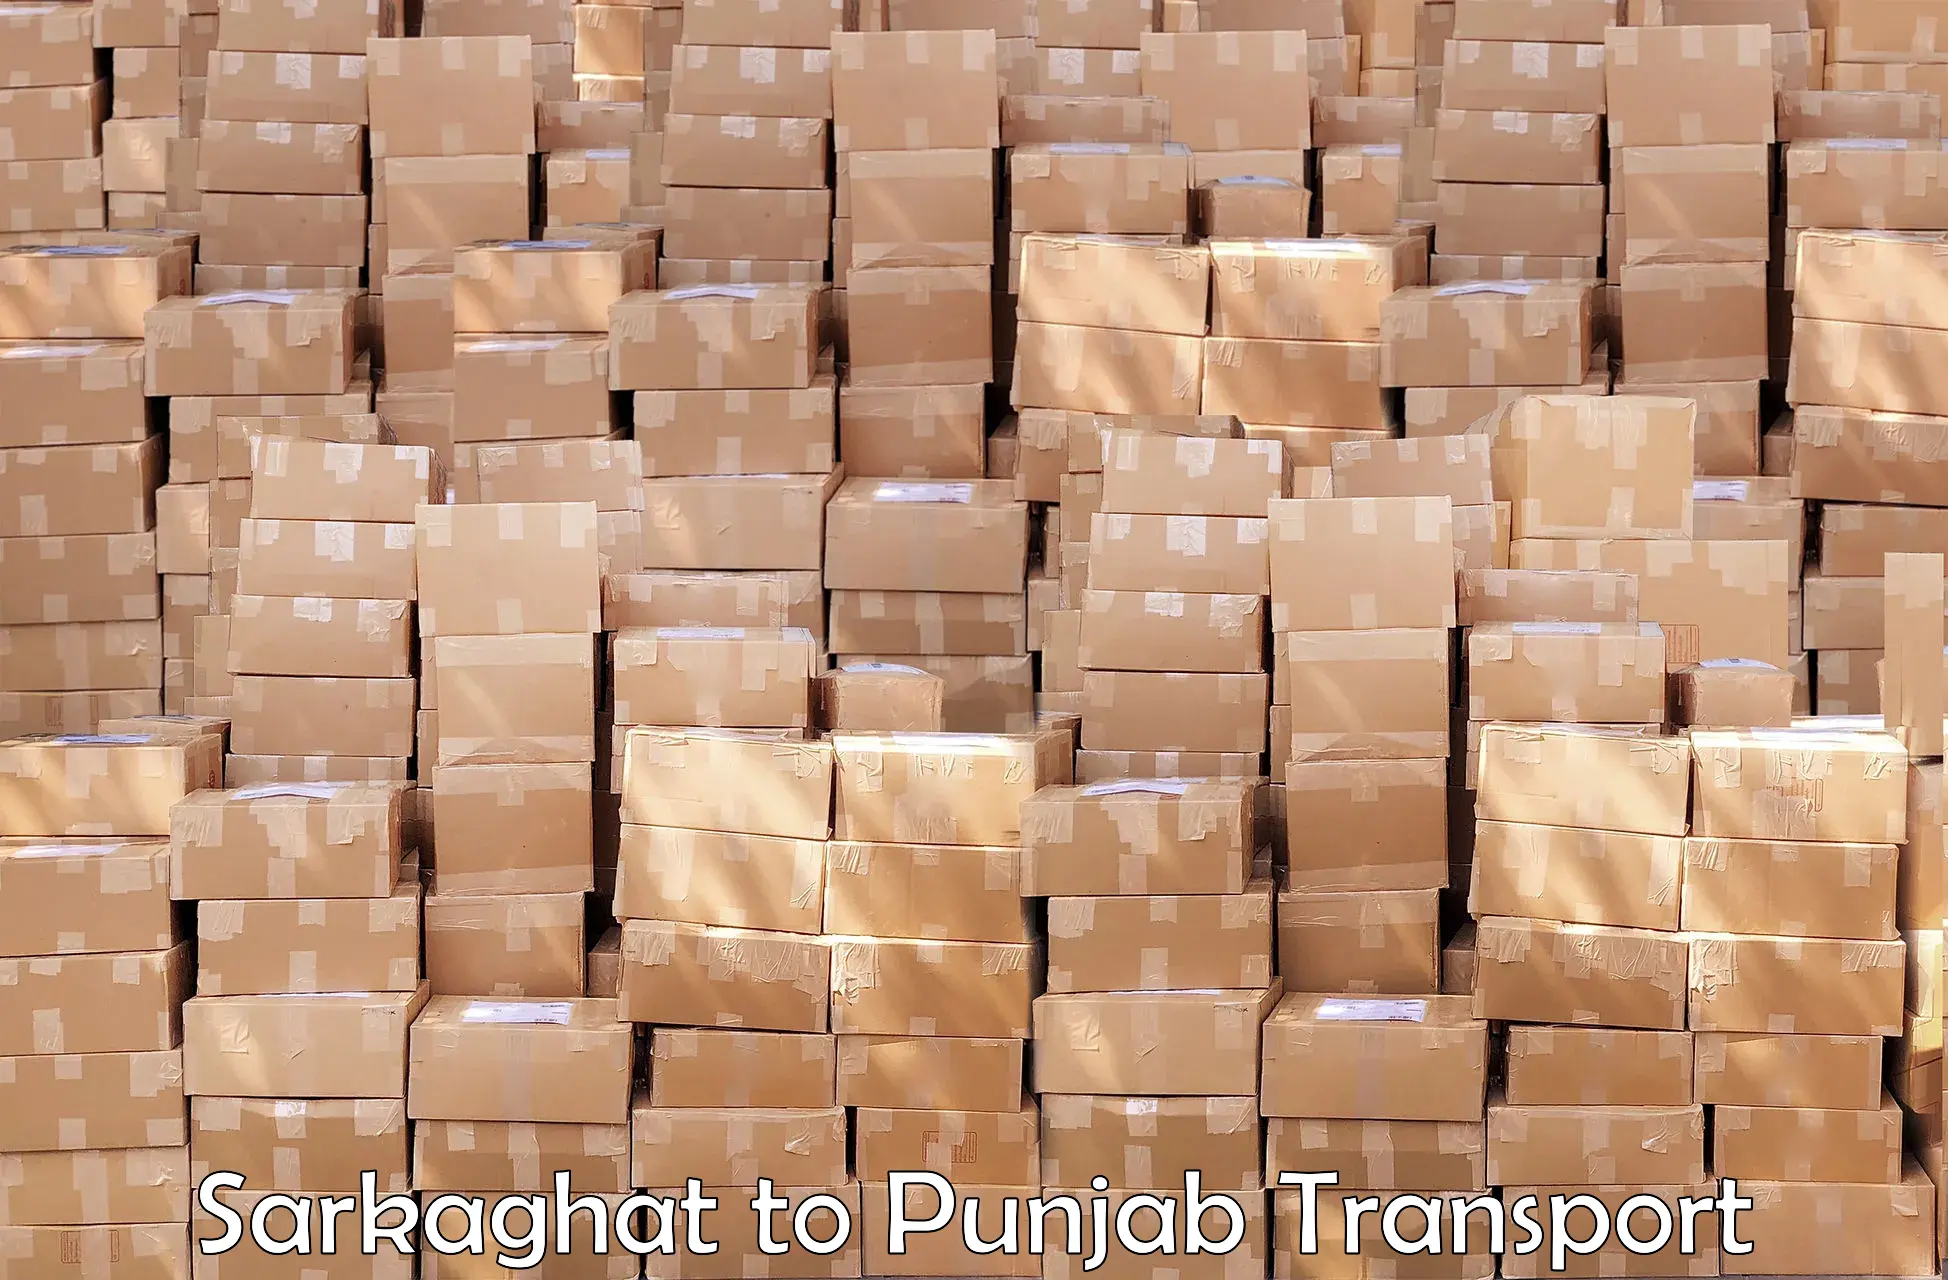 Cargo transportation services Sarkaghat to IIT Ropar